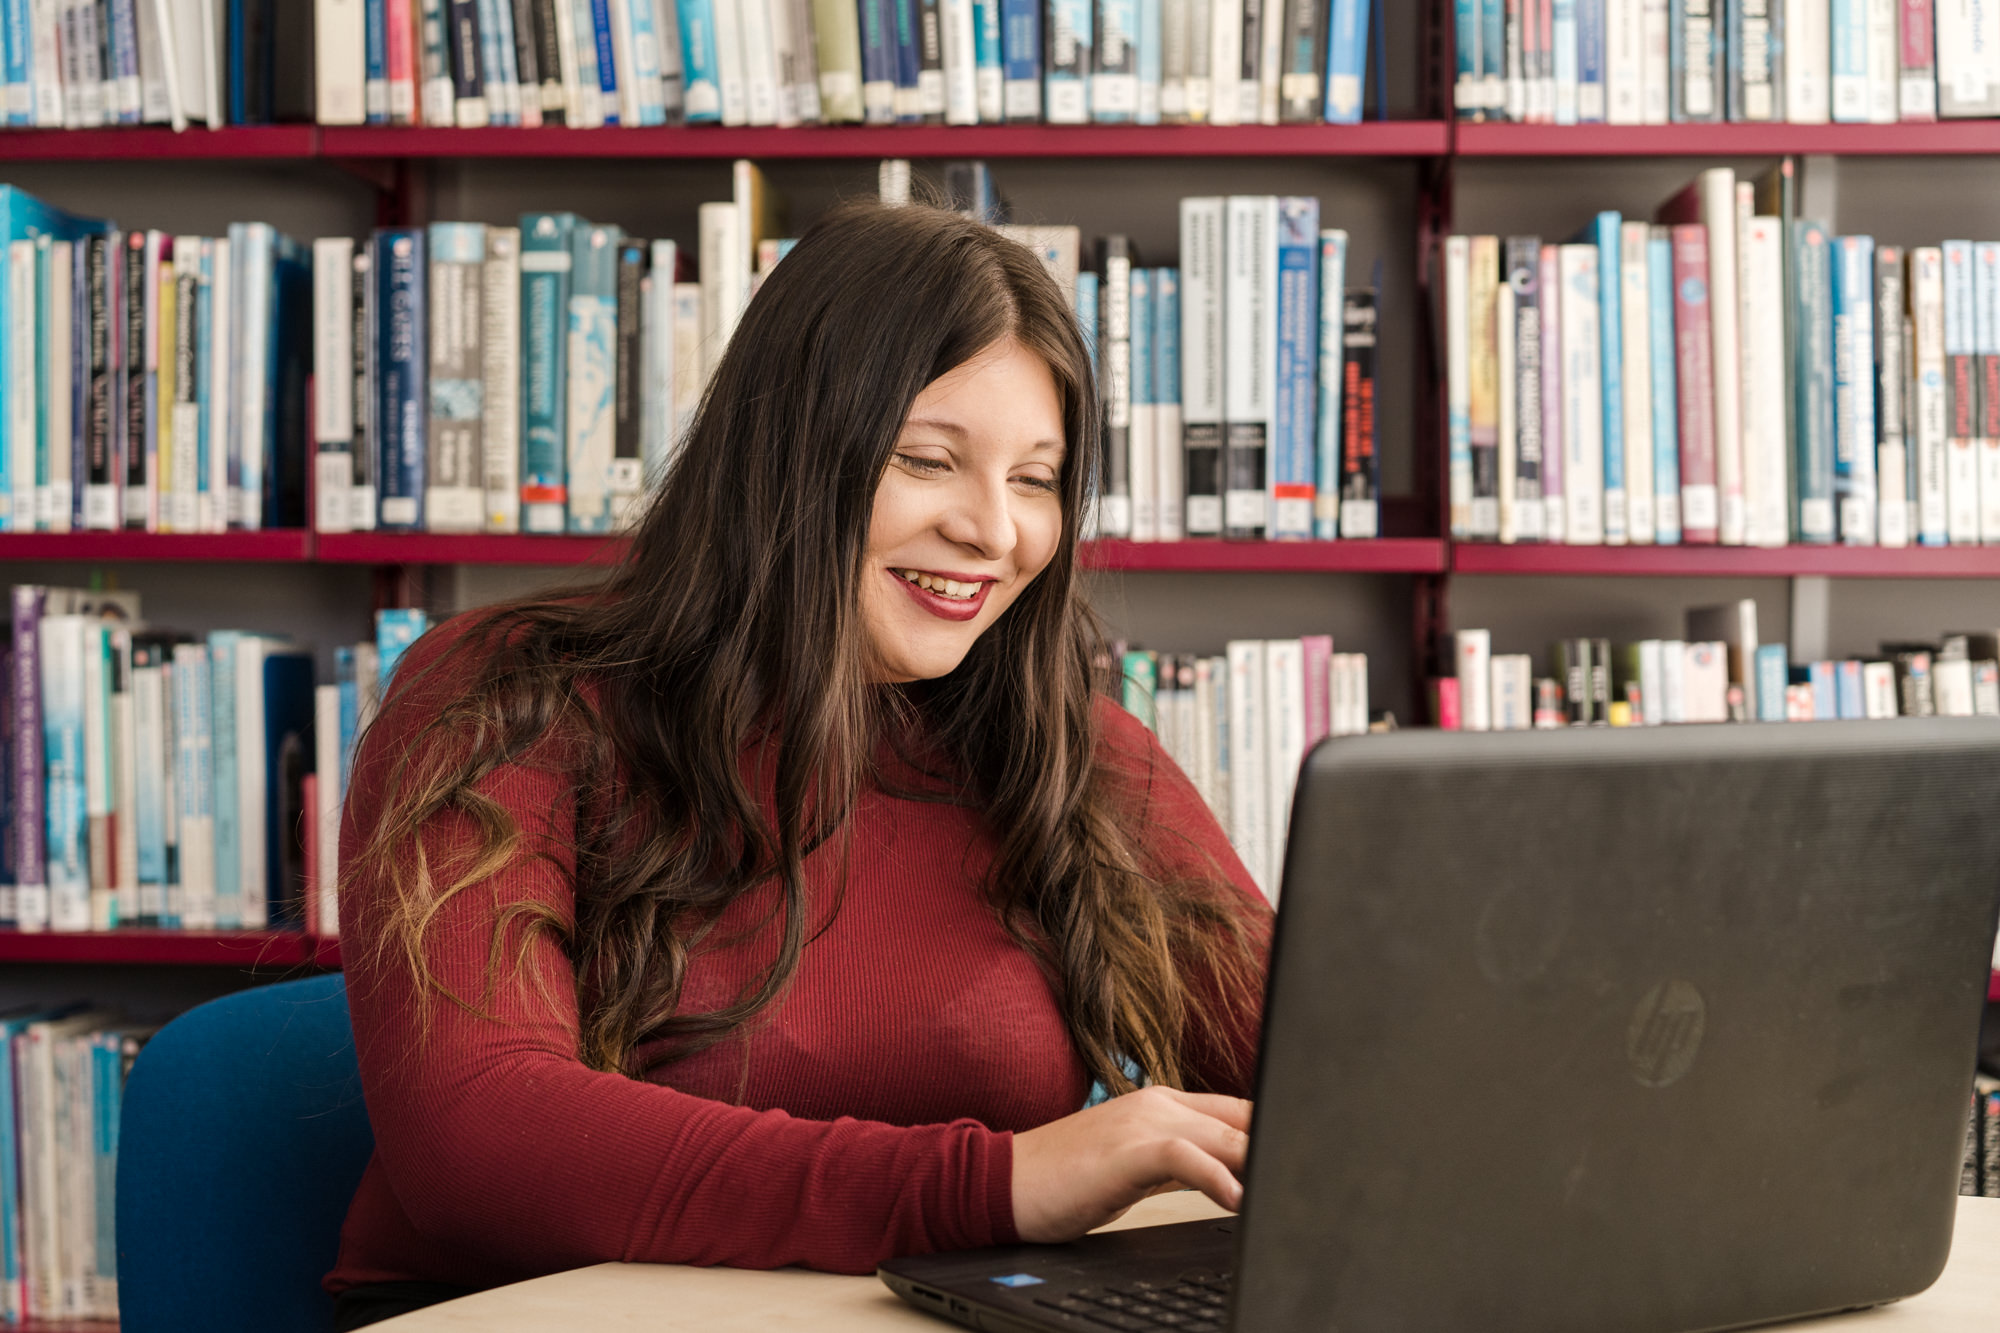 Female student sitting in a library working on her laptop